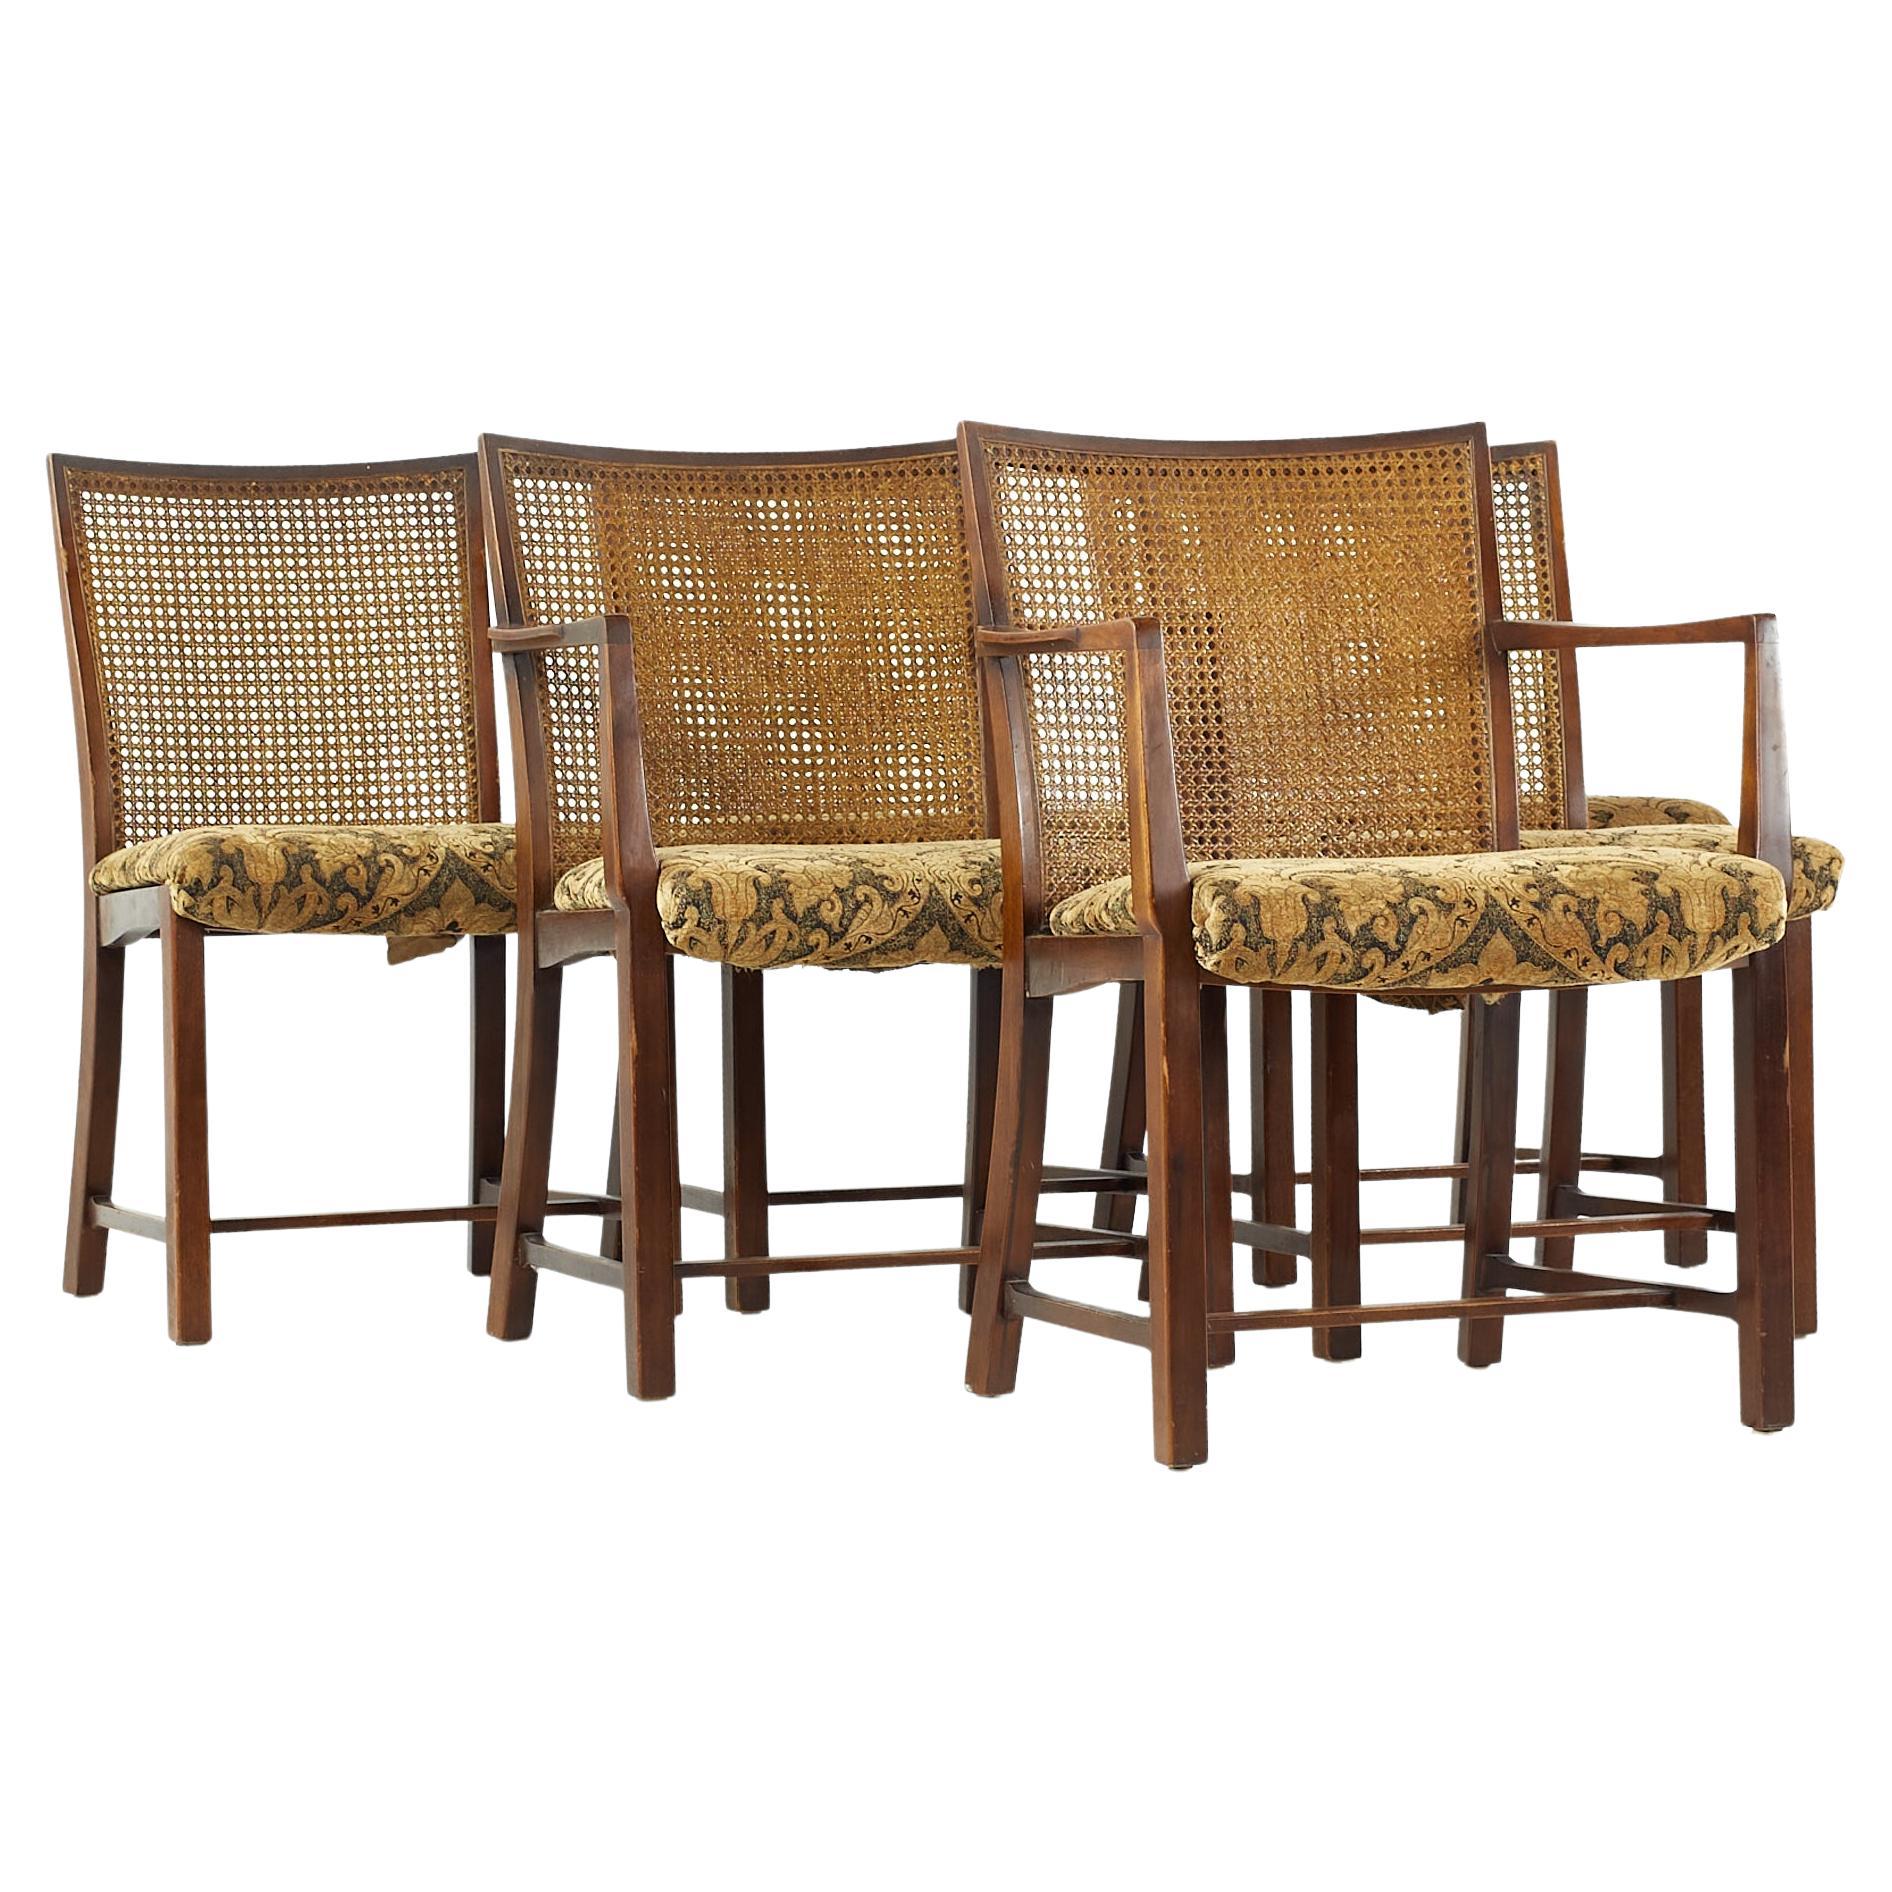 Michael Taylor for Baker Midcentury Cane Back Dining Chairs, Set of 6 For Sale